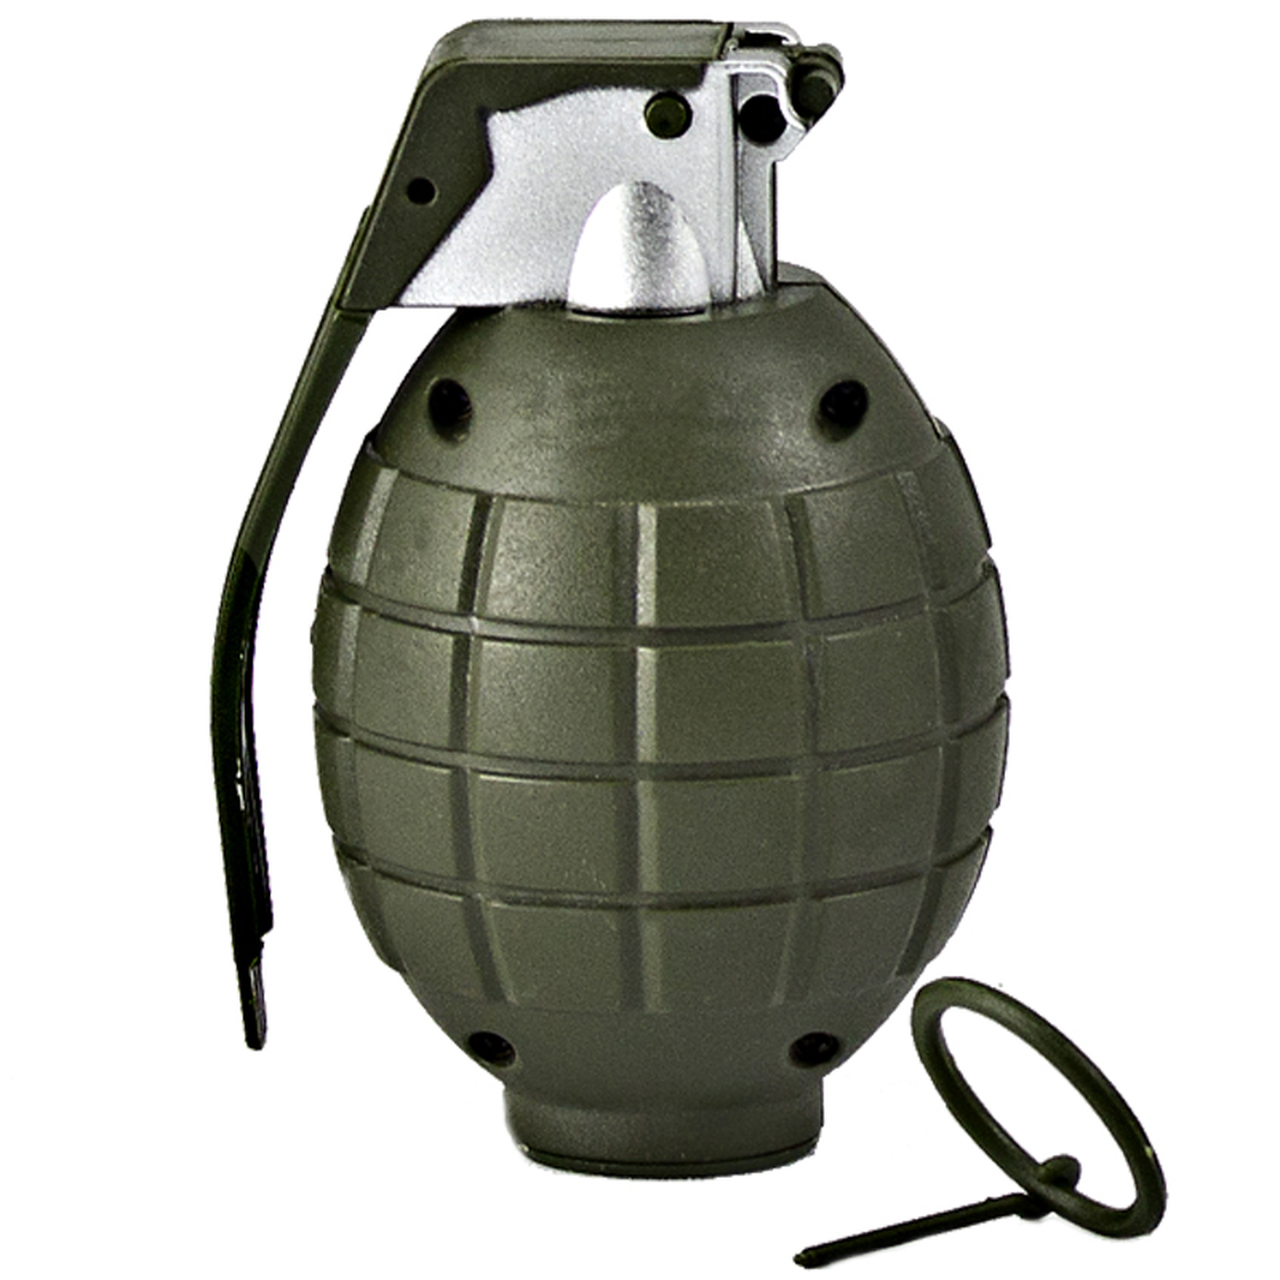 Detail Picture Of A Grenade Nomer 24